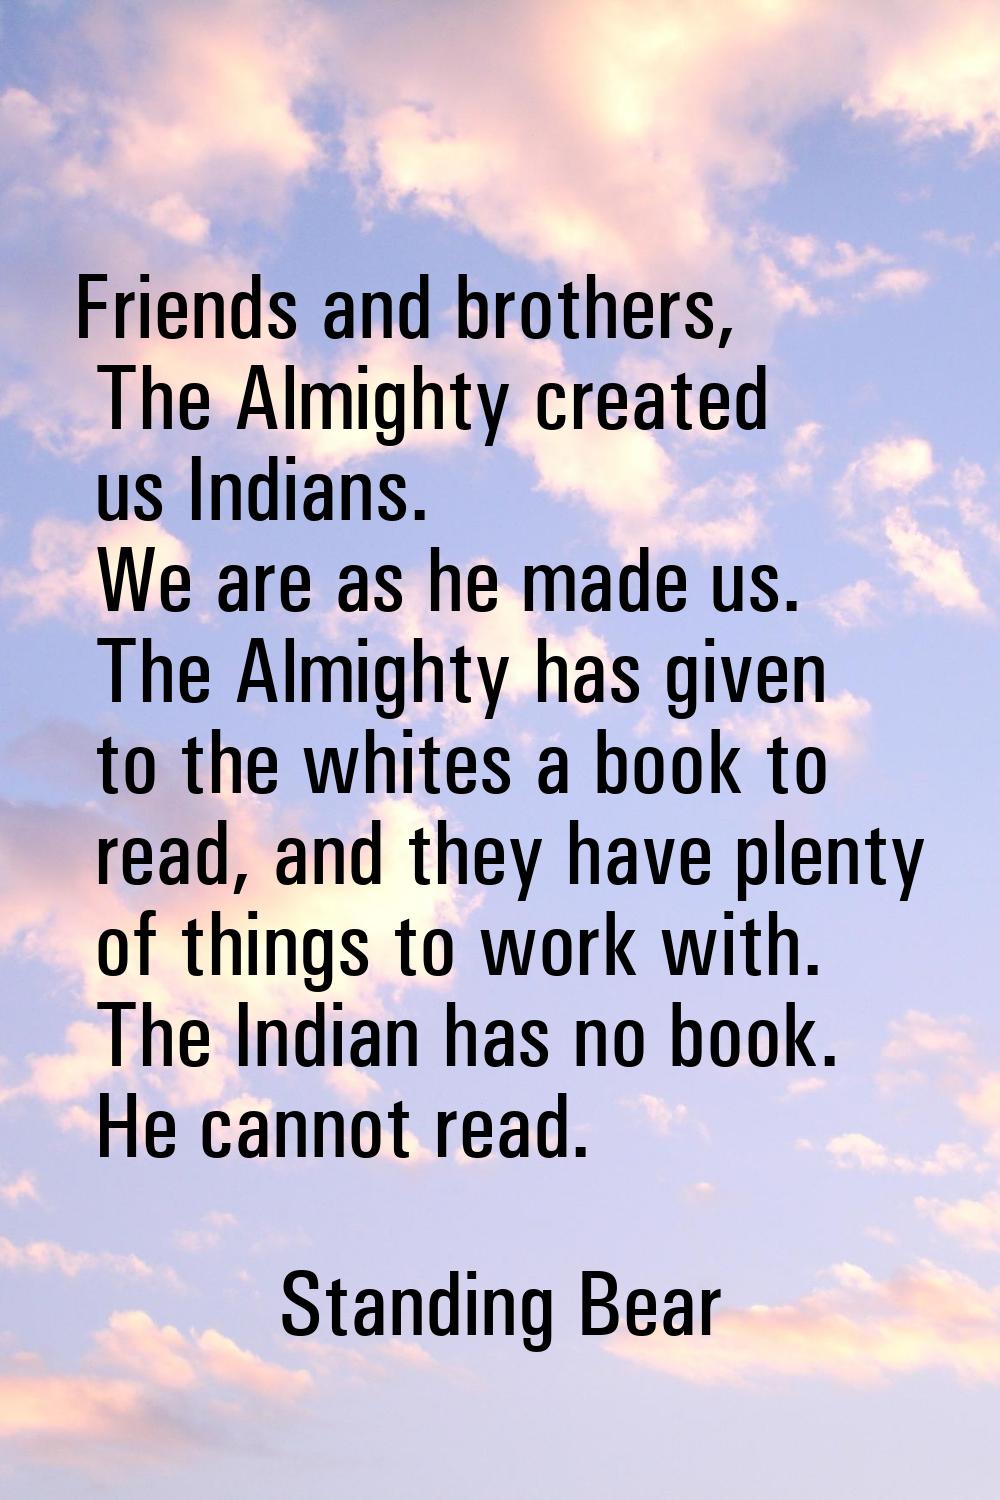 Friends and brothers, The Almighty created us Indians. We are as he made us. The Almighty has given